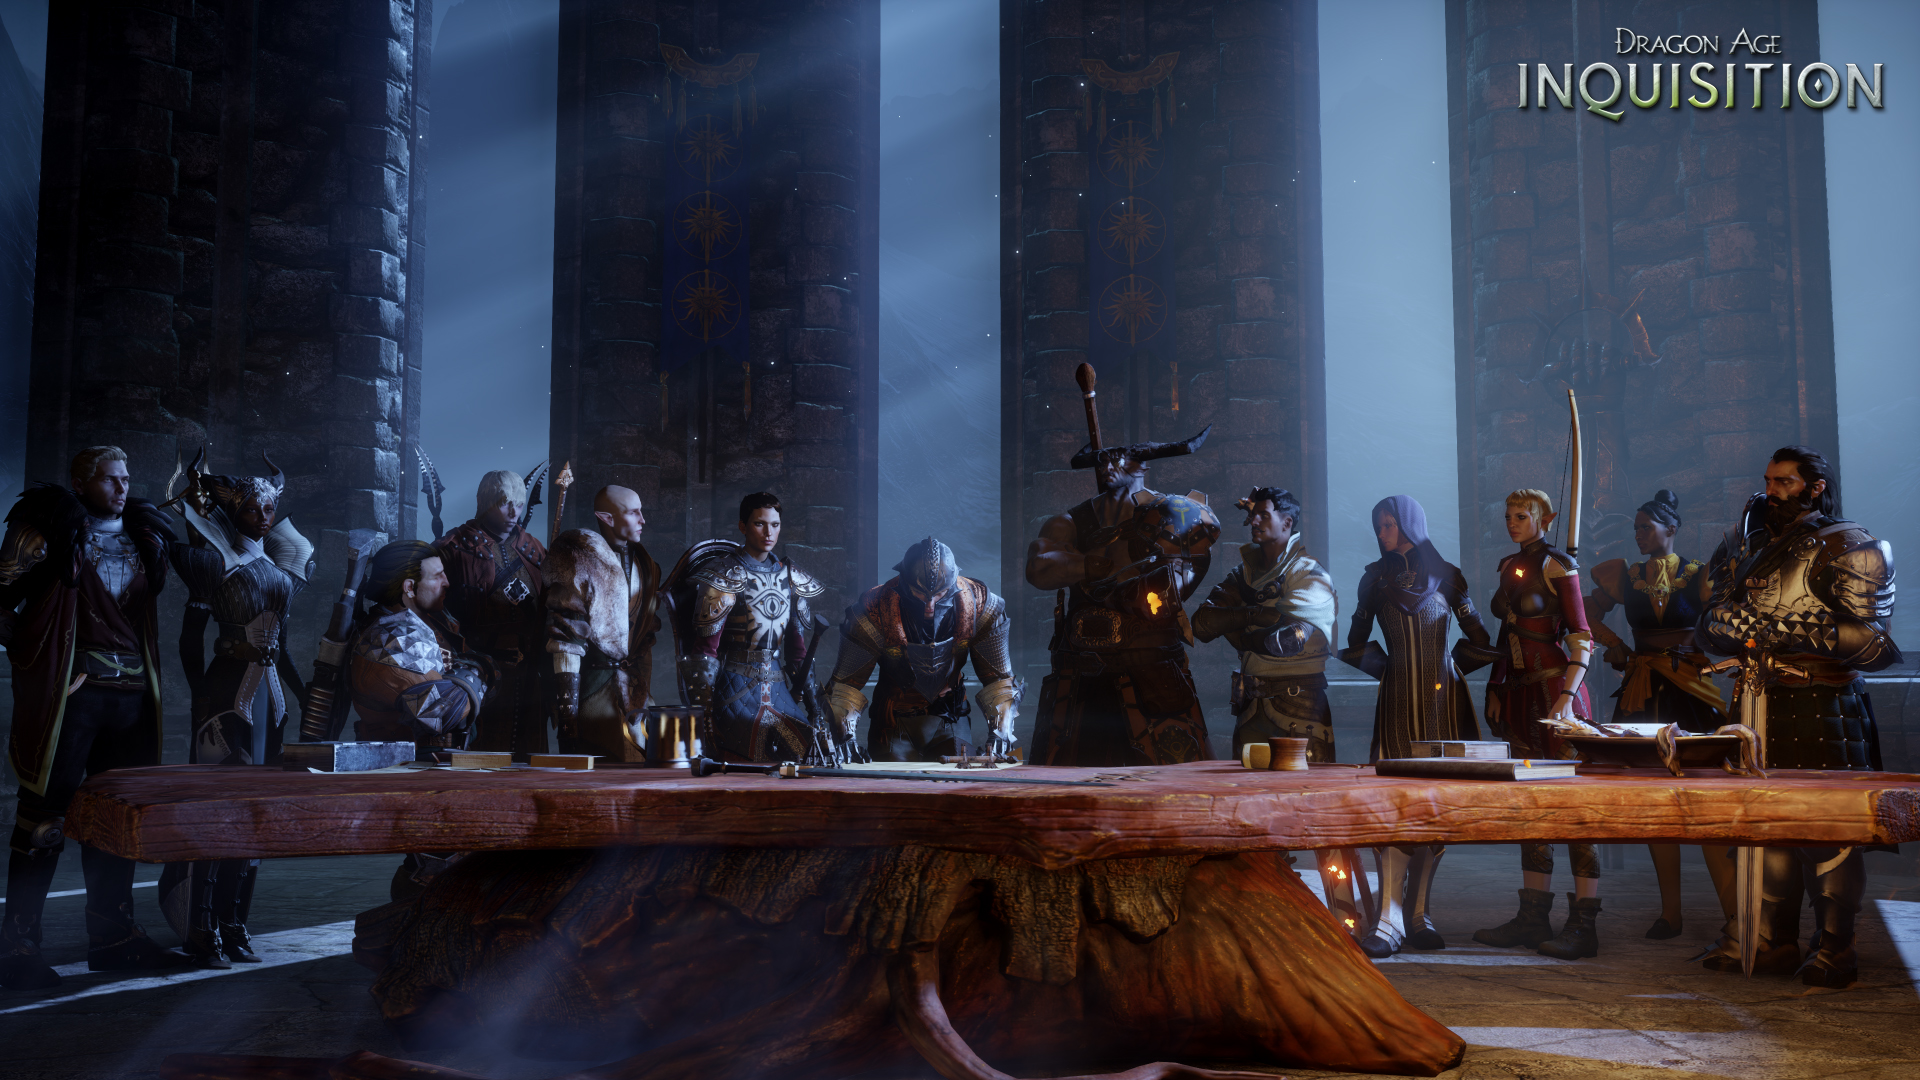 Dragon age inquisition update download